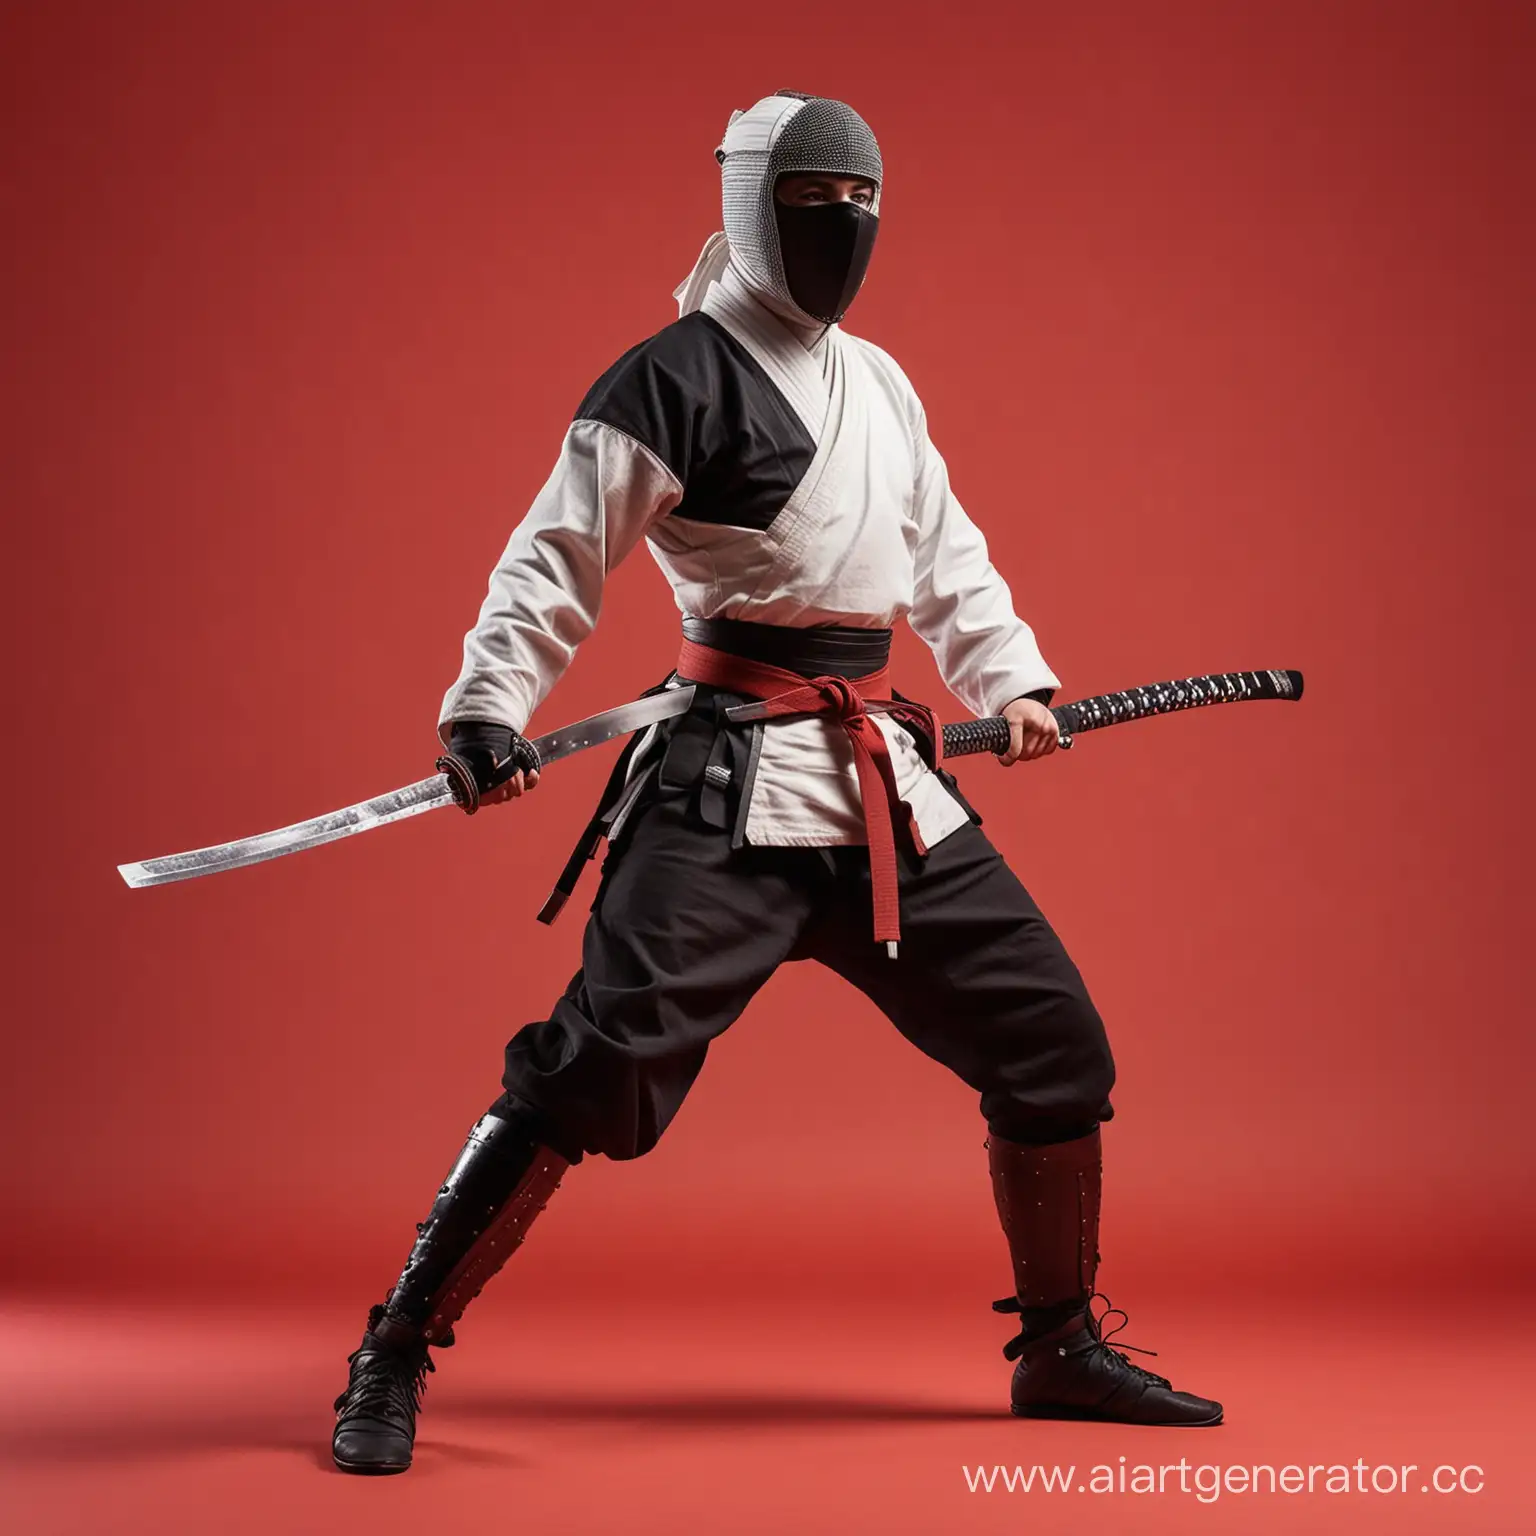 Katana-Warrior-in-Fencing-Mask-on-Red-Background